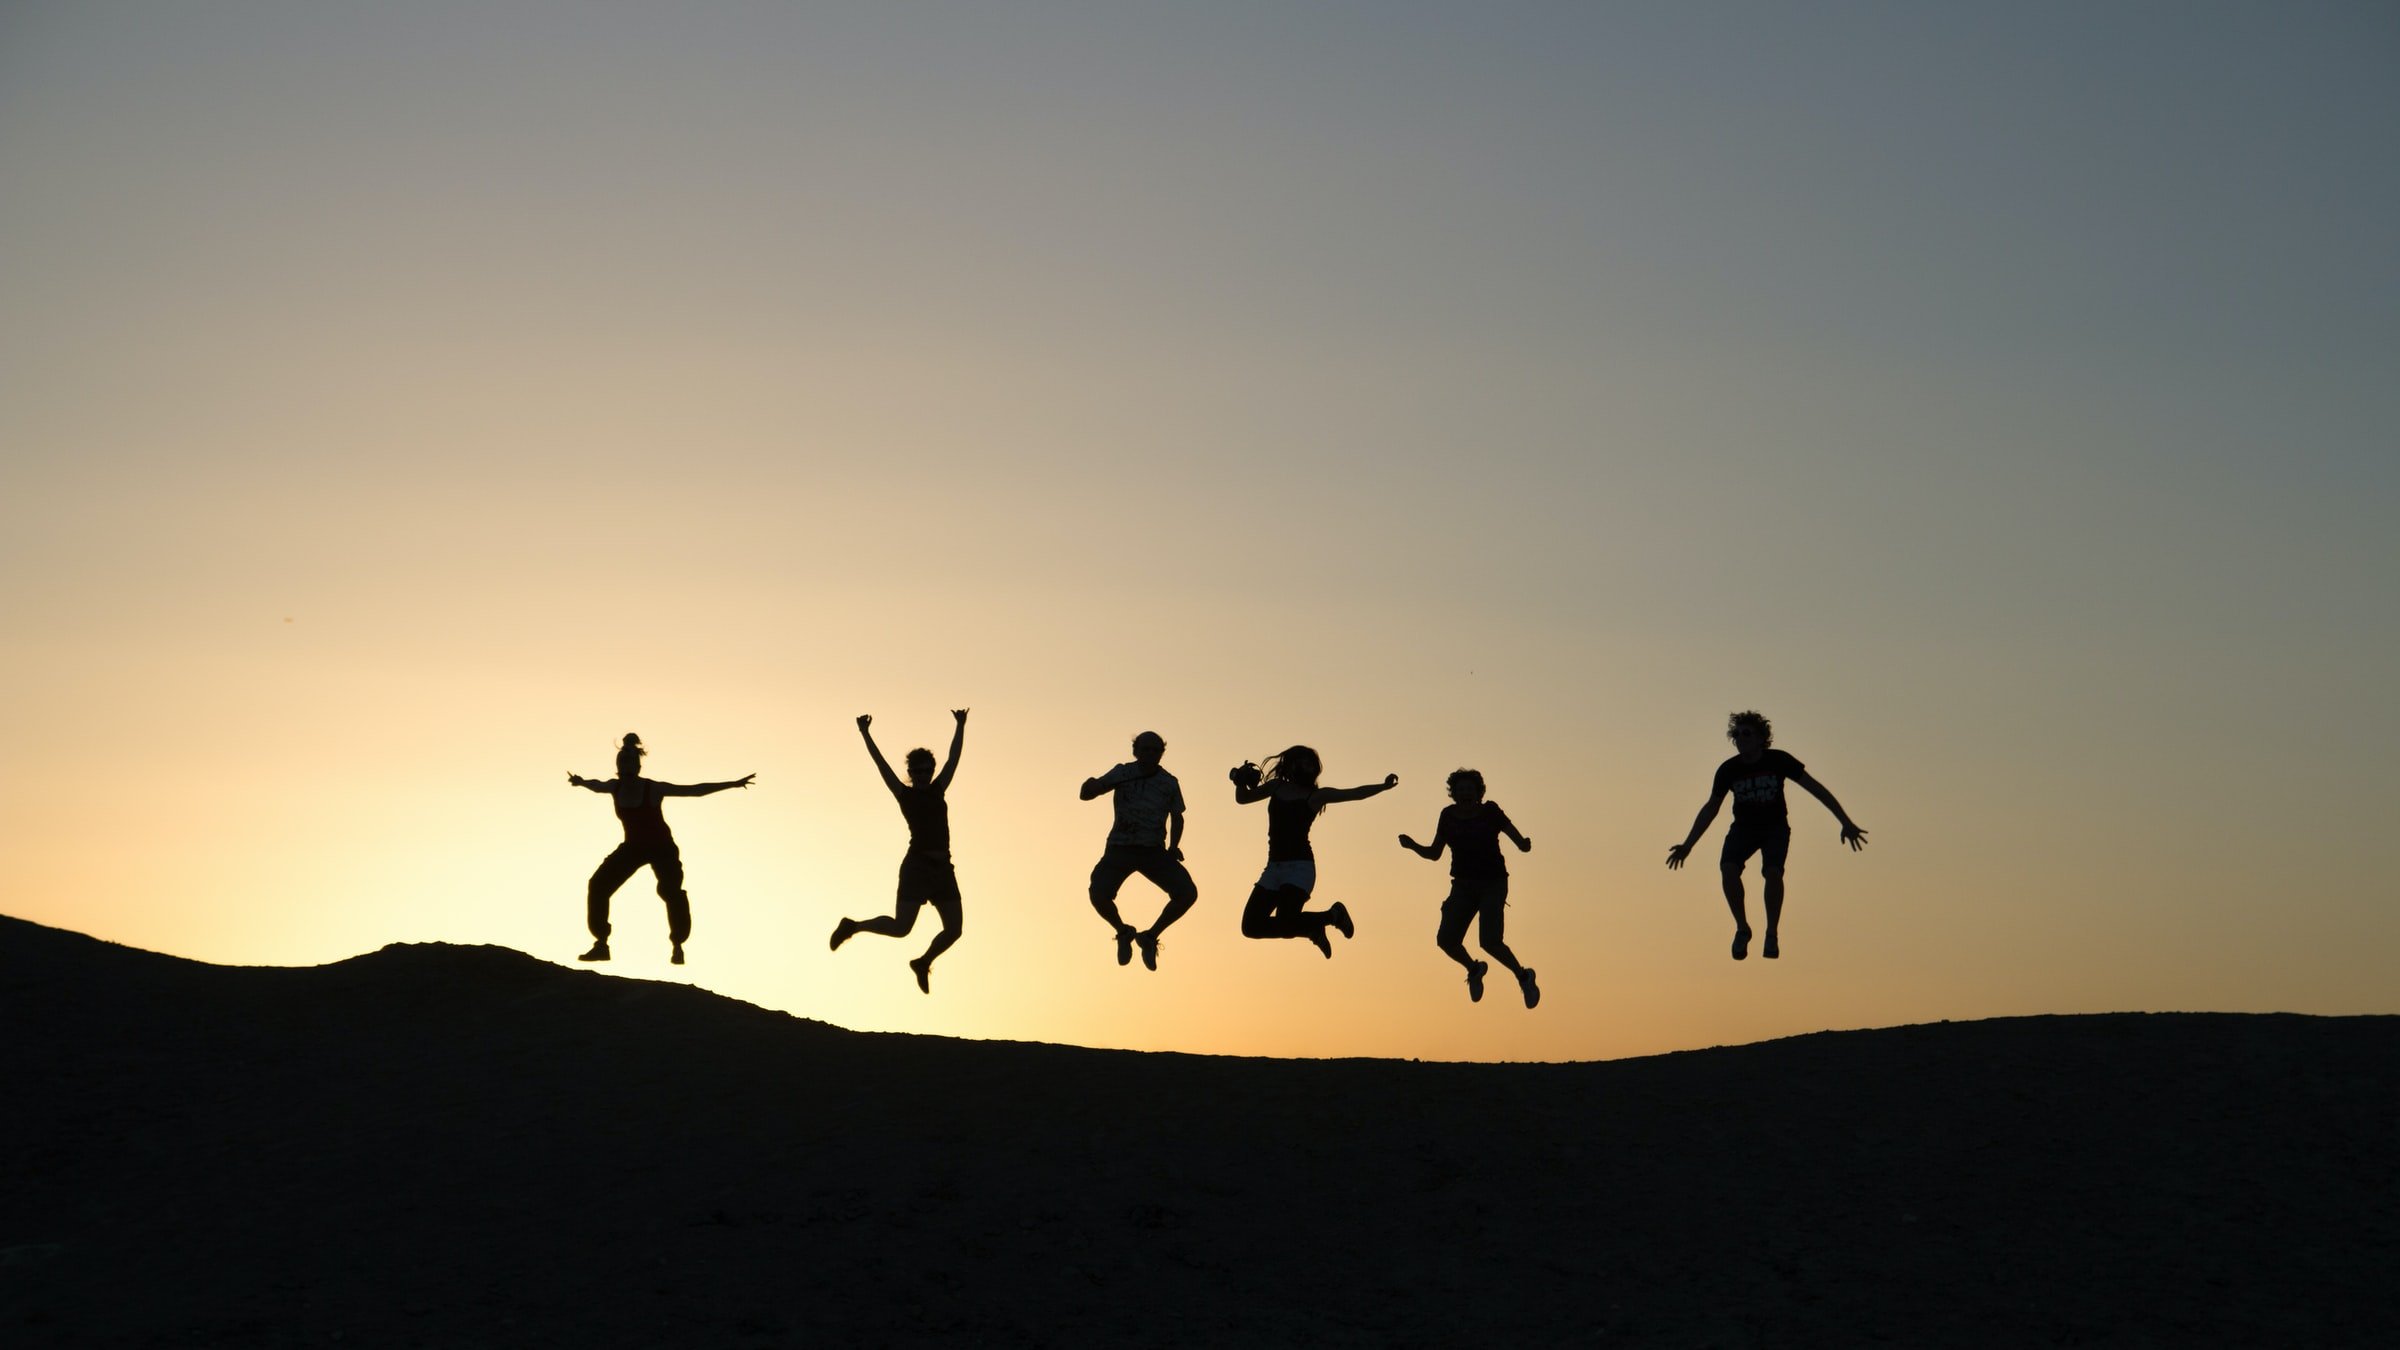 silhouette image of six people jumping in the air